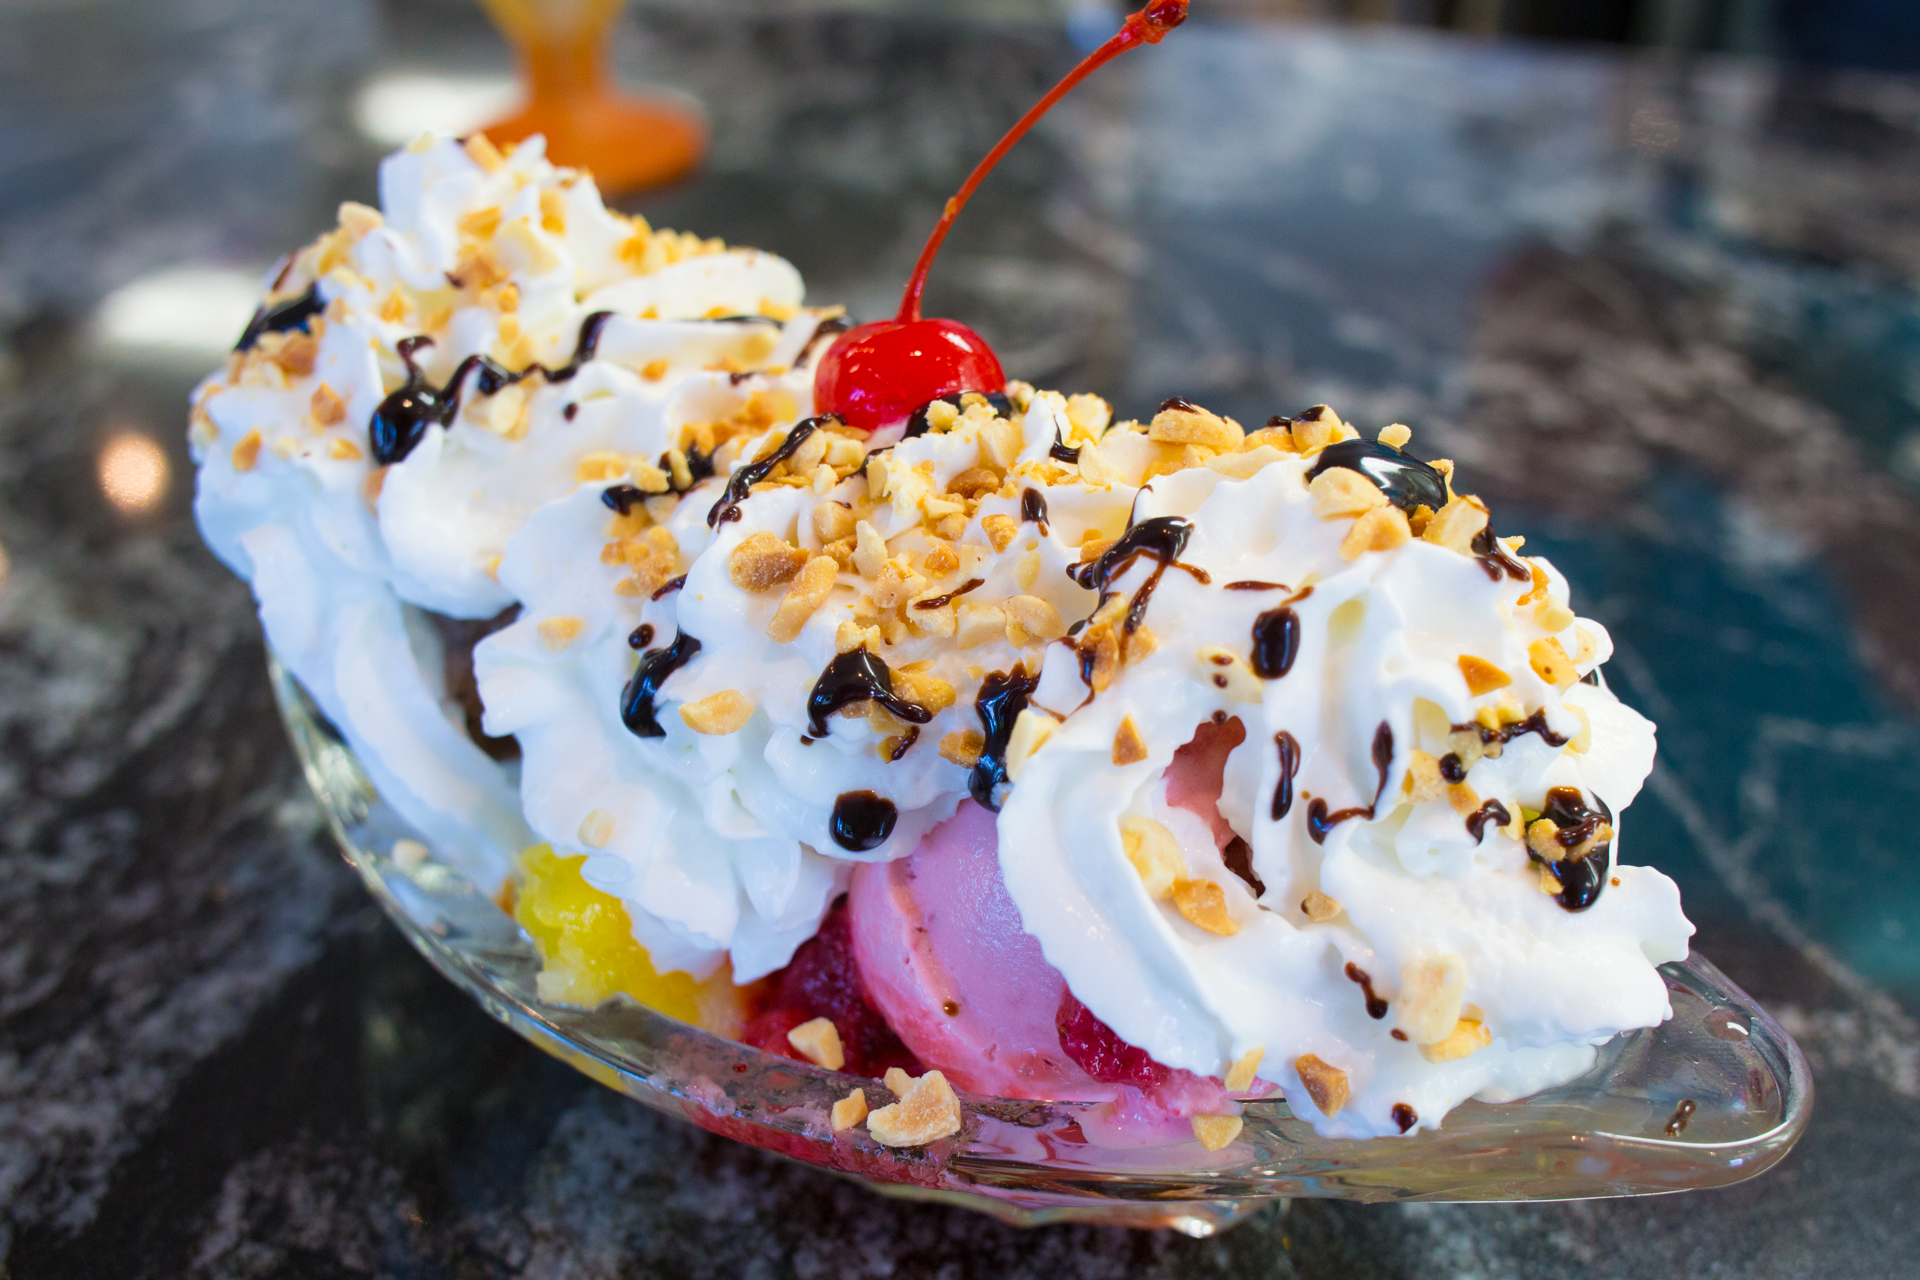 Which flavor of gelato would you include in your sundae?